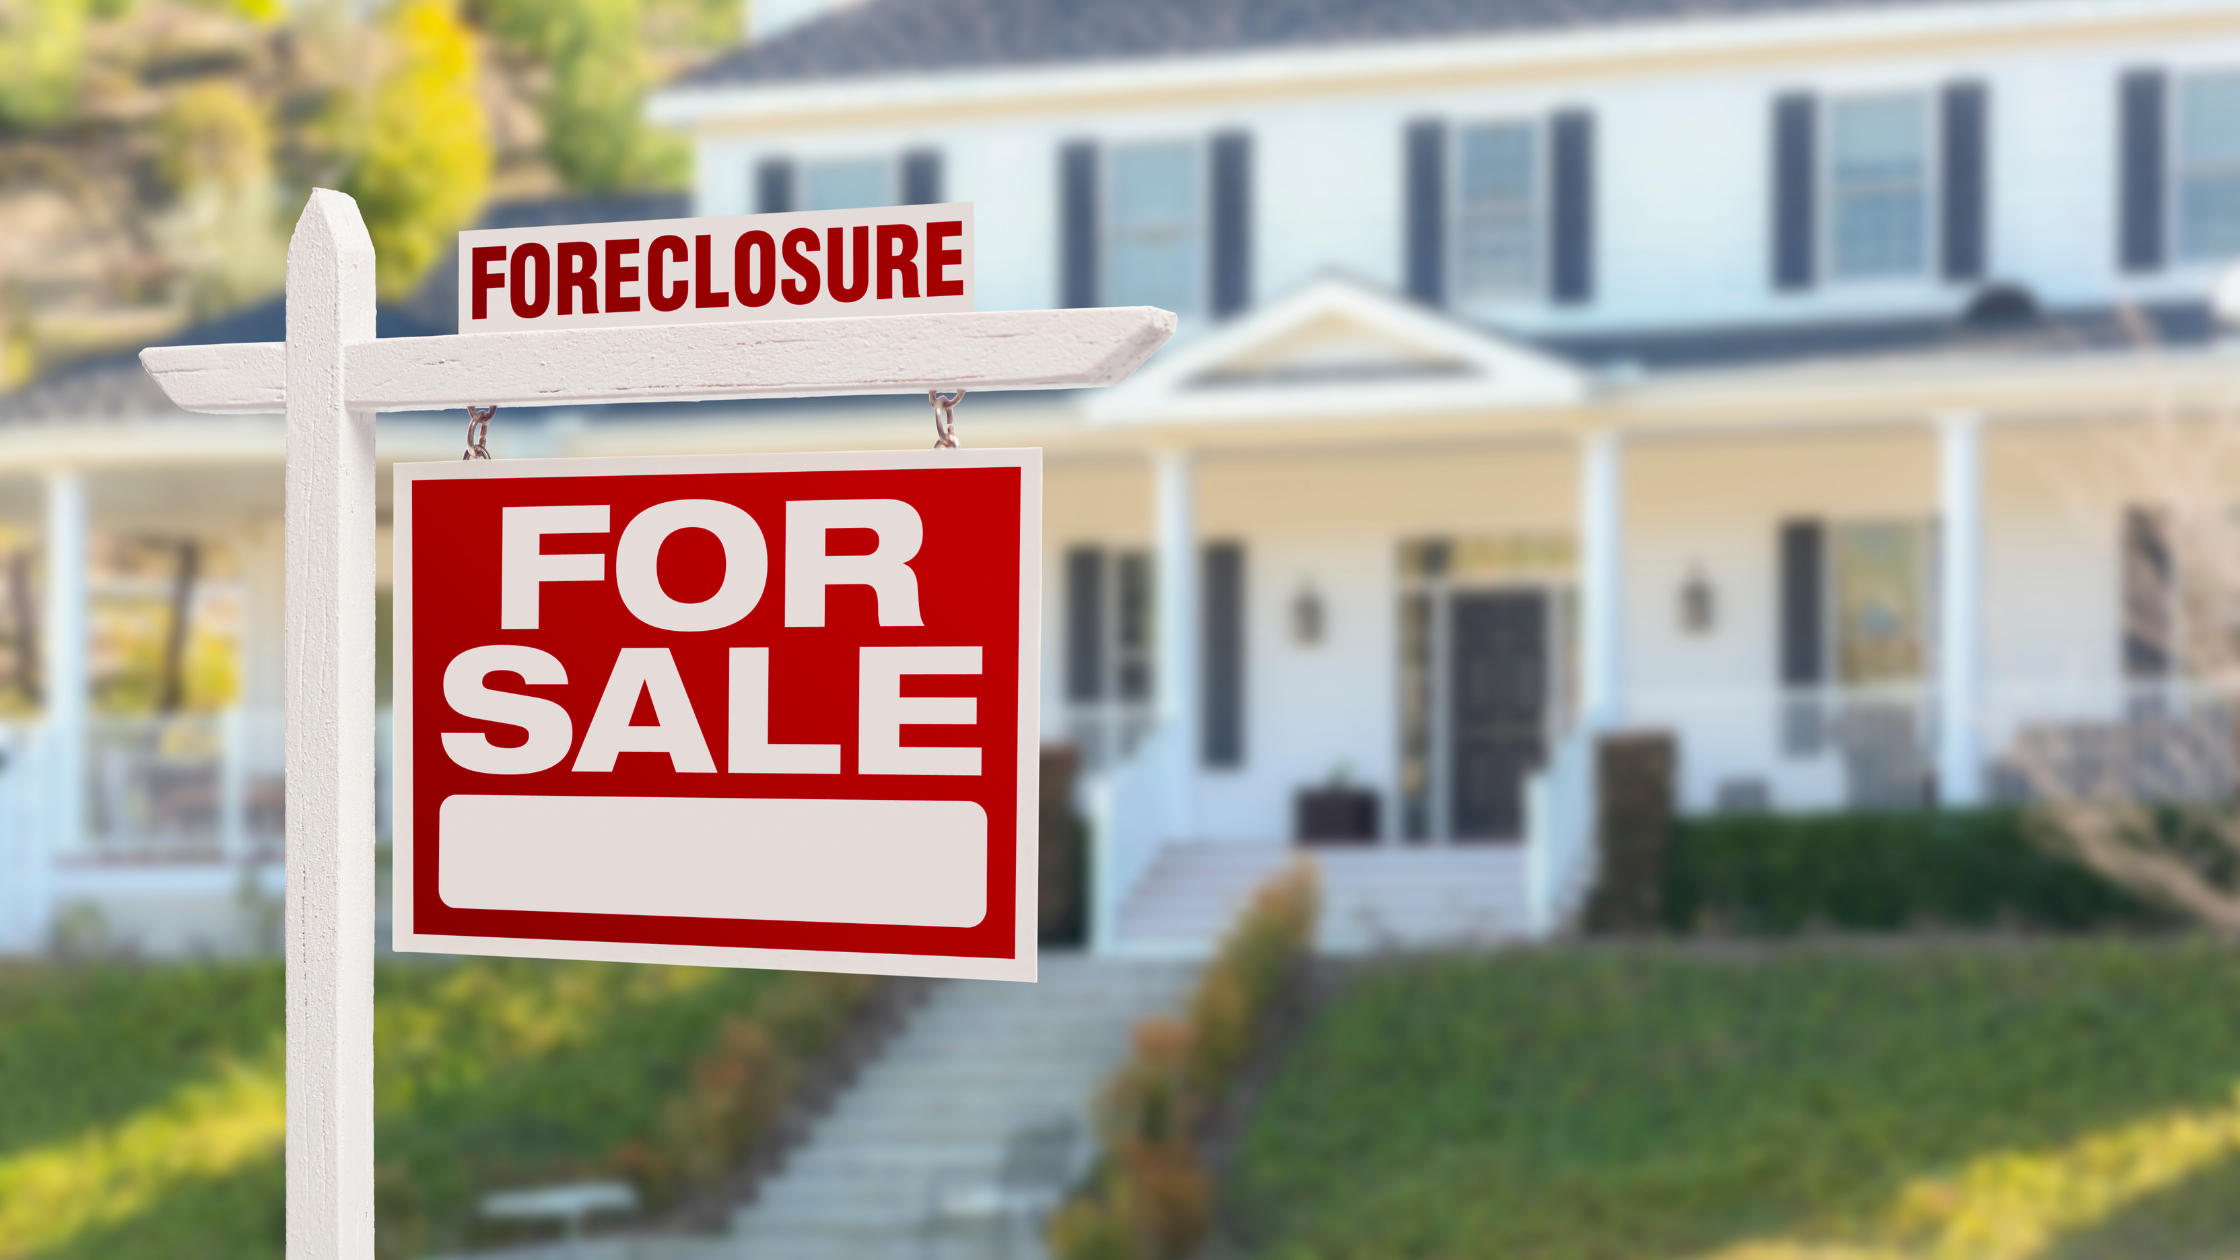 what makes buying a foreclosed property risky on what makes buying a foreclosed property risky select two. framework